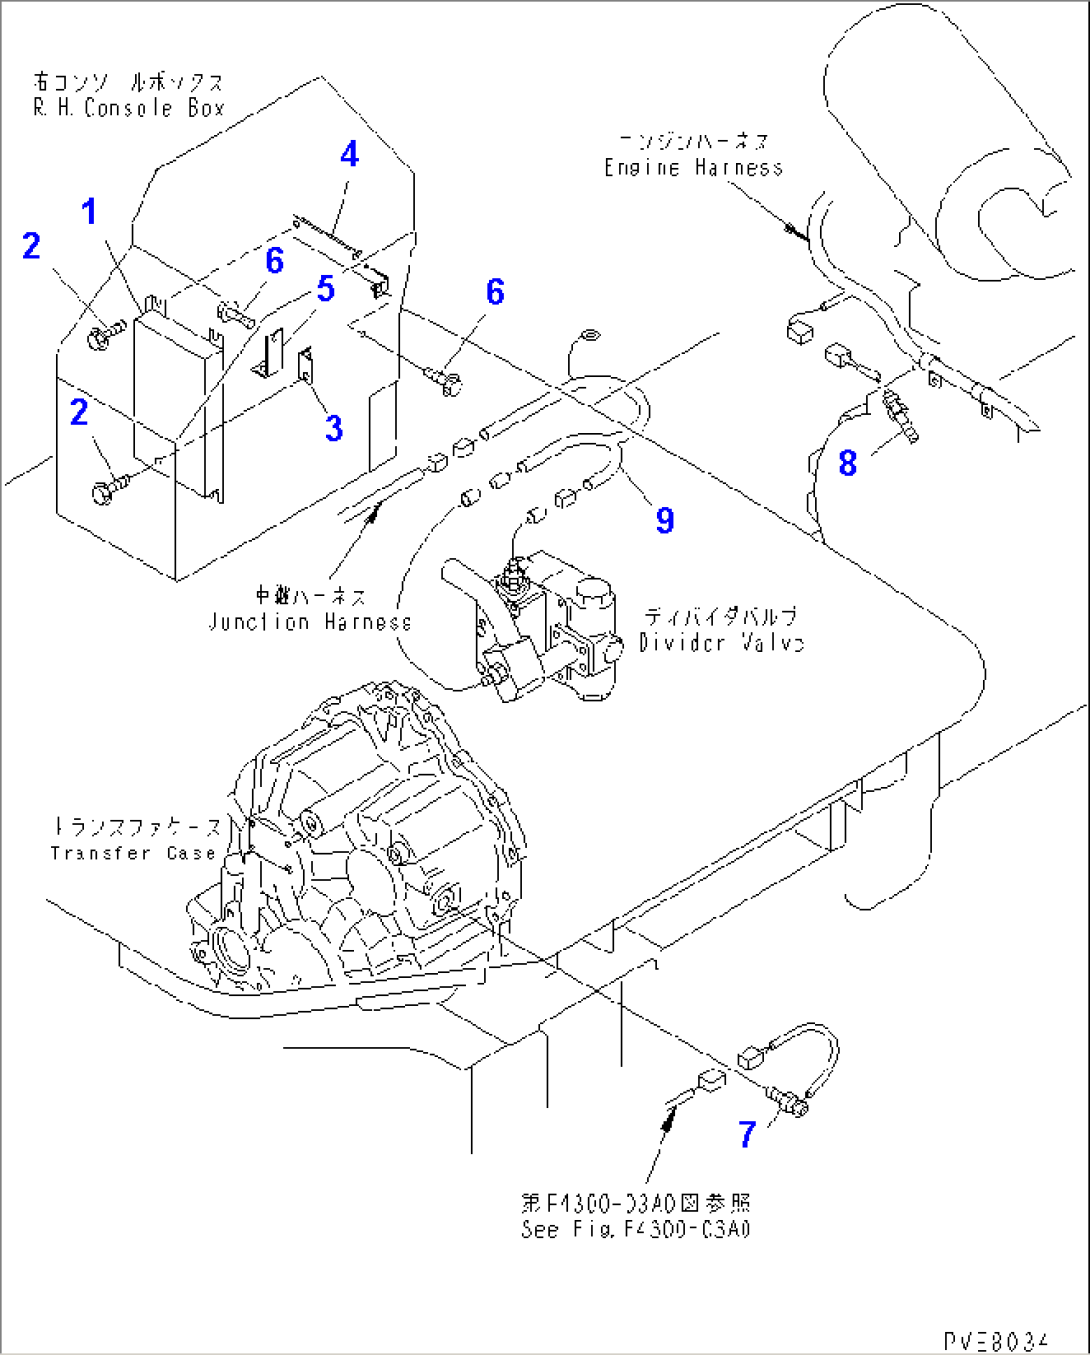 ELECTRICAL SYSTEM (TRANSMISSION CONTROLLER AND RELATED PARTS)